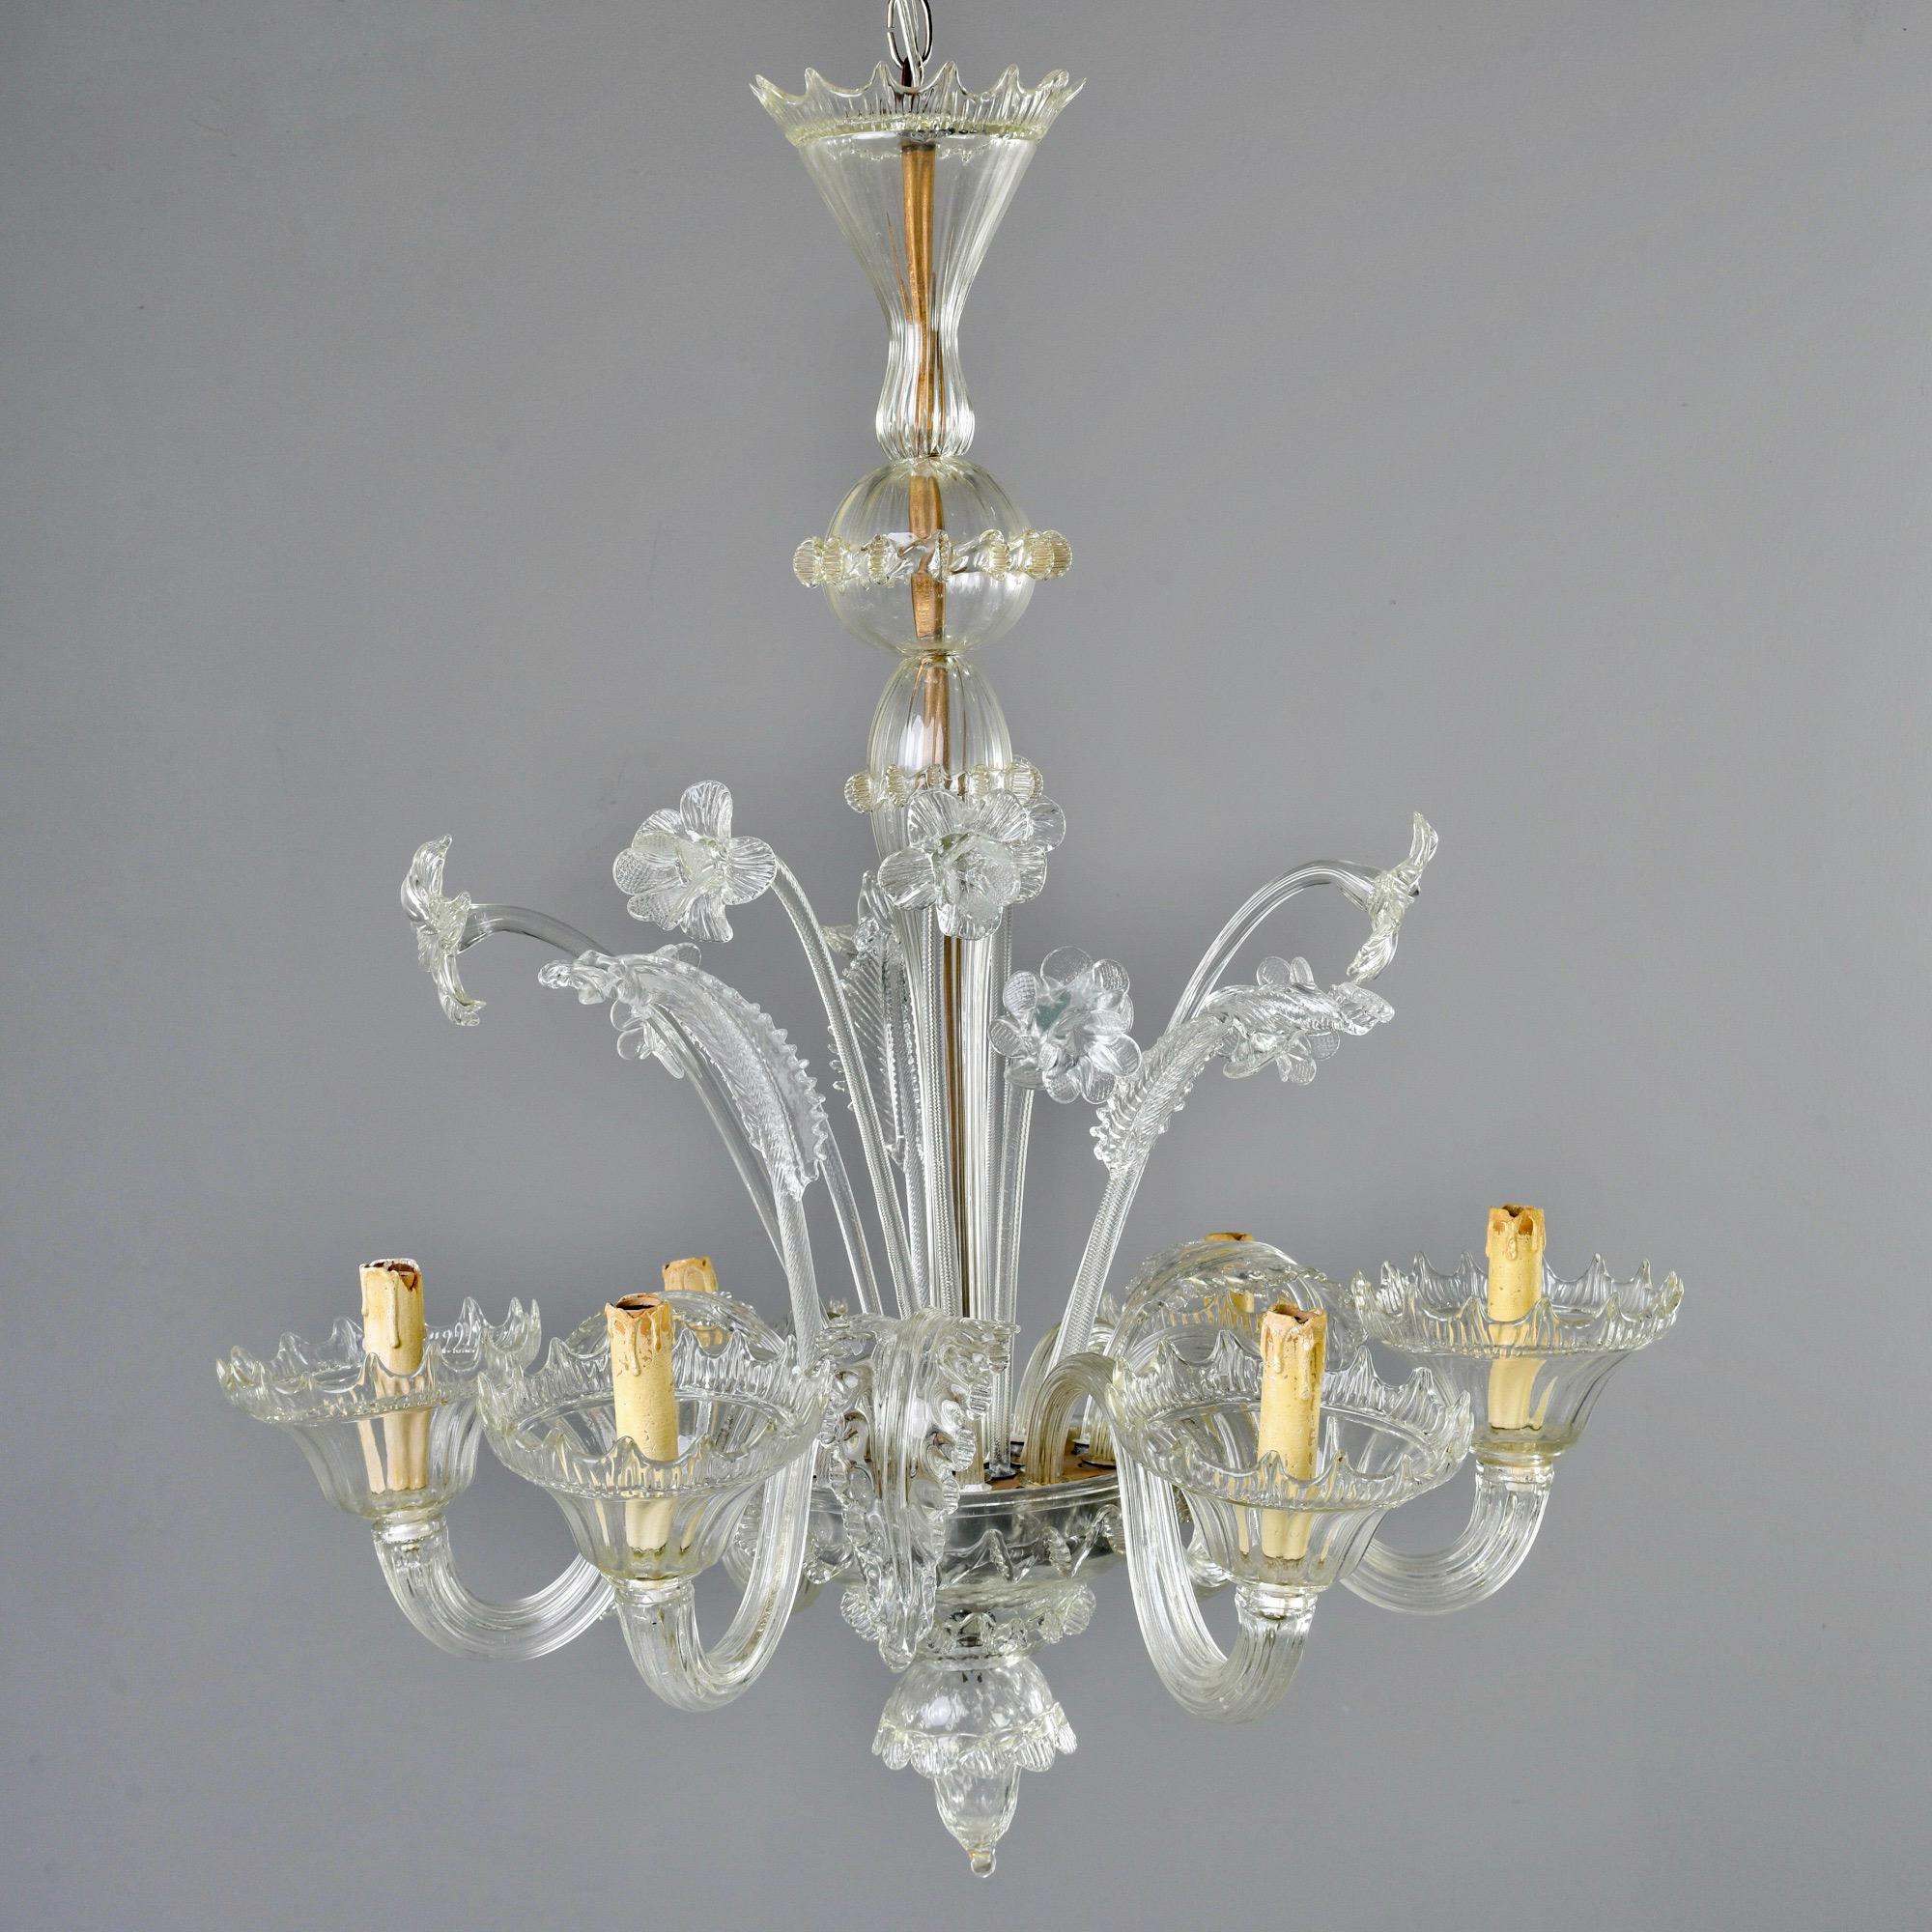 Six-arm clear Venetian glass chandelier with one-tier of daffodils and leaves and a hand blown glass shaft and canopy, circa 1940s. New wiring for US electrical standards.